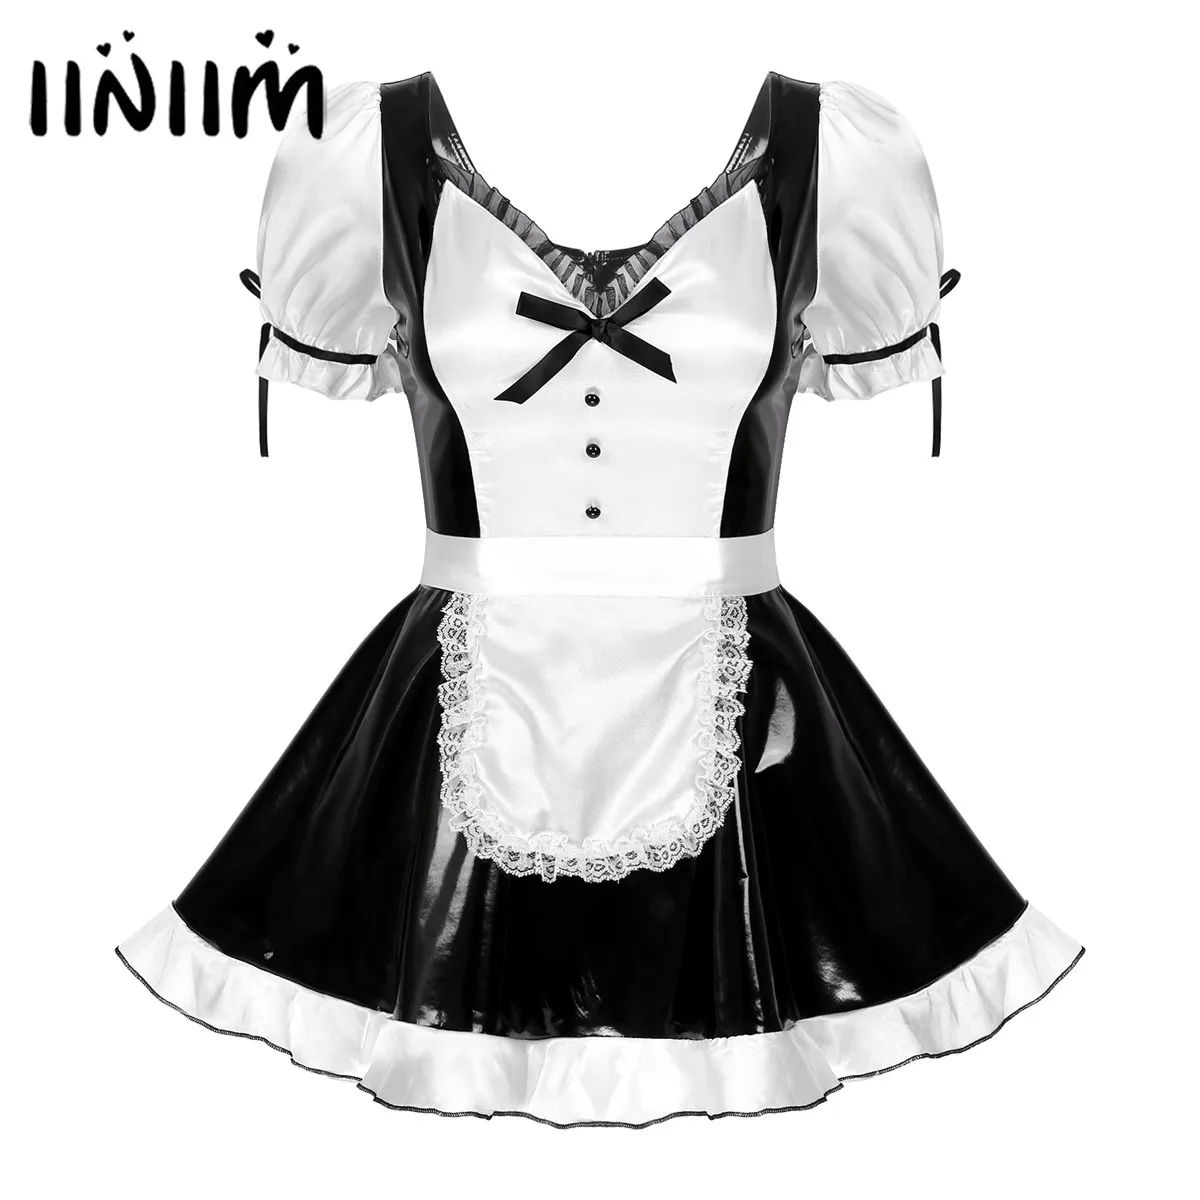 

Women Halloween Role Play Maid Outfits Theme Party Costume Puff Sleeve Ruffled Layered Flared Patent Leather Dress with Apron